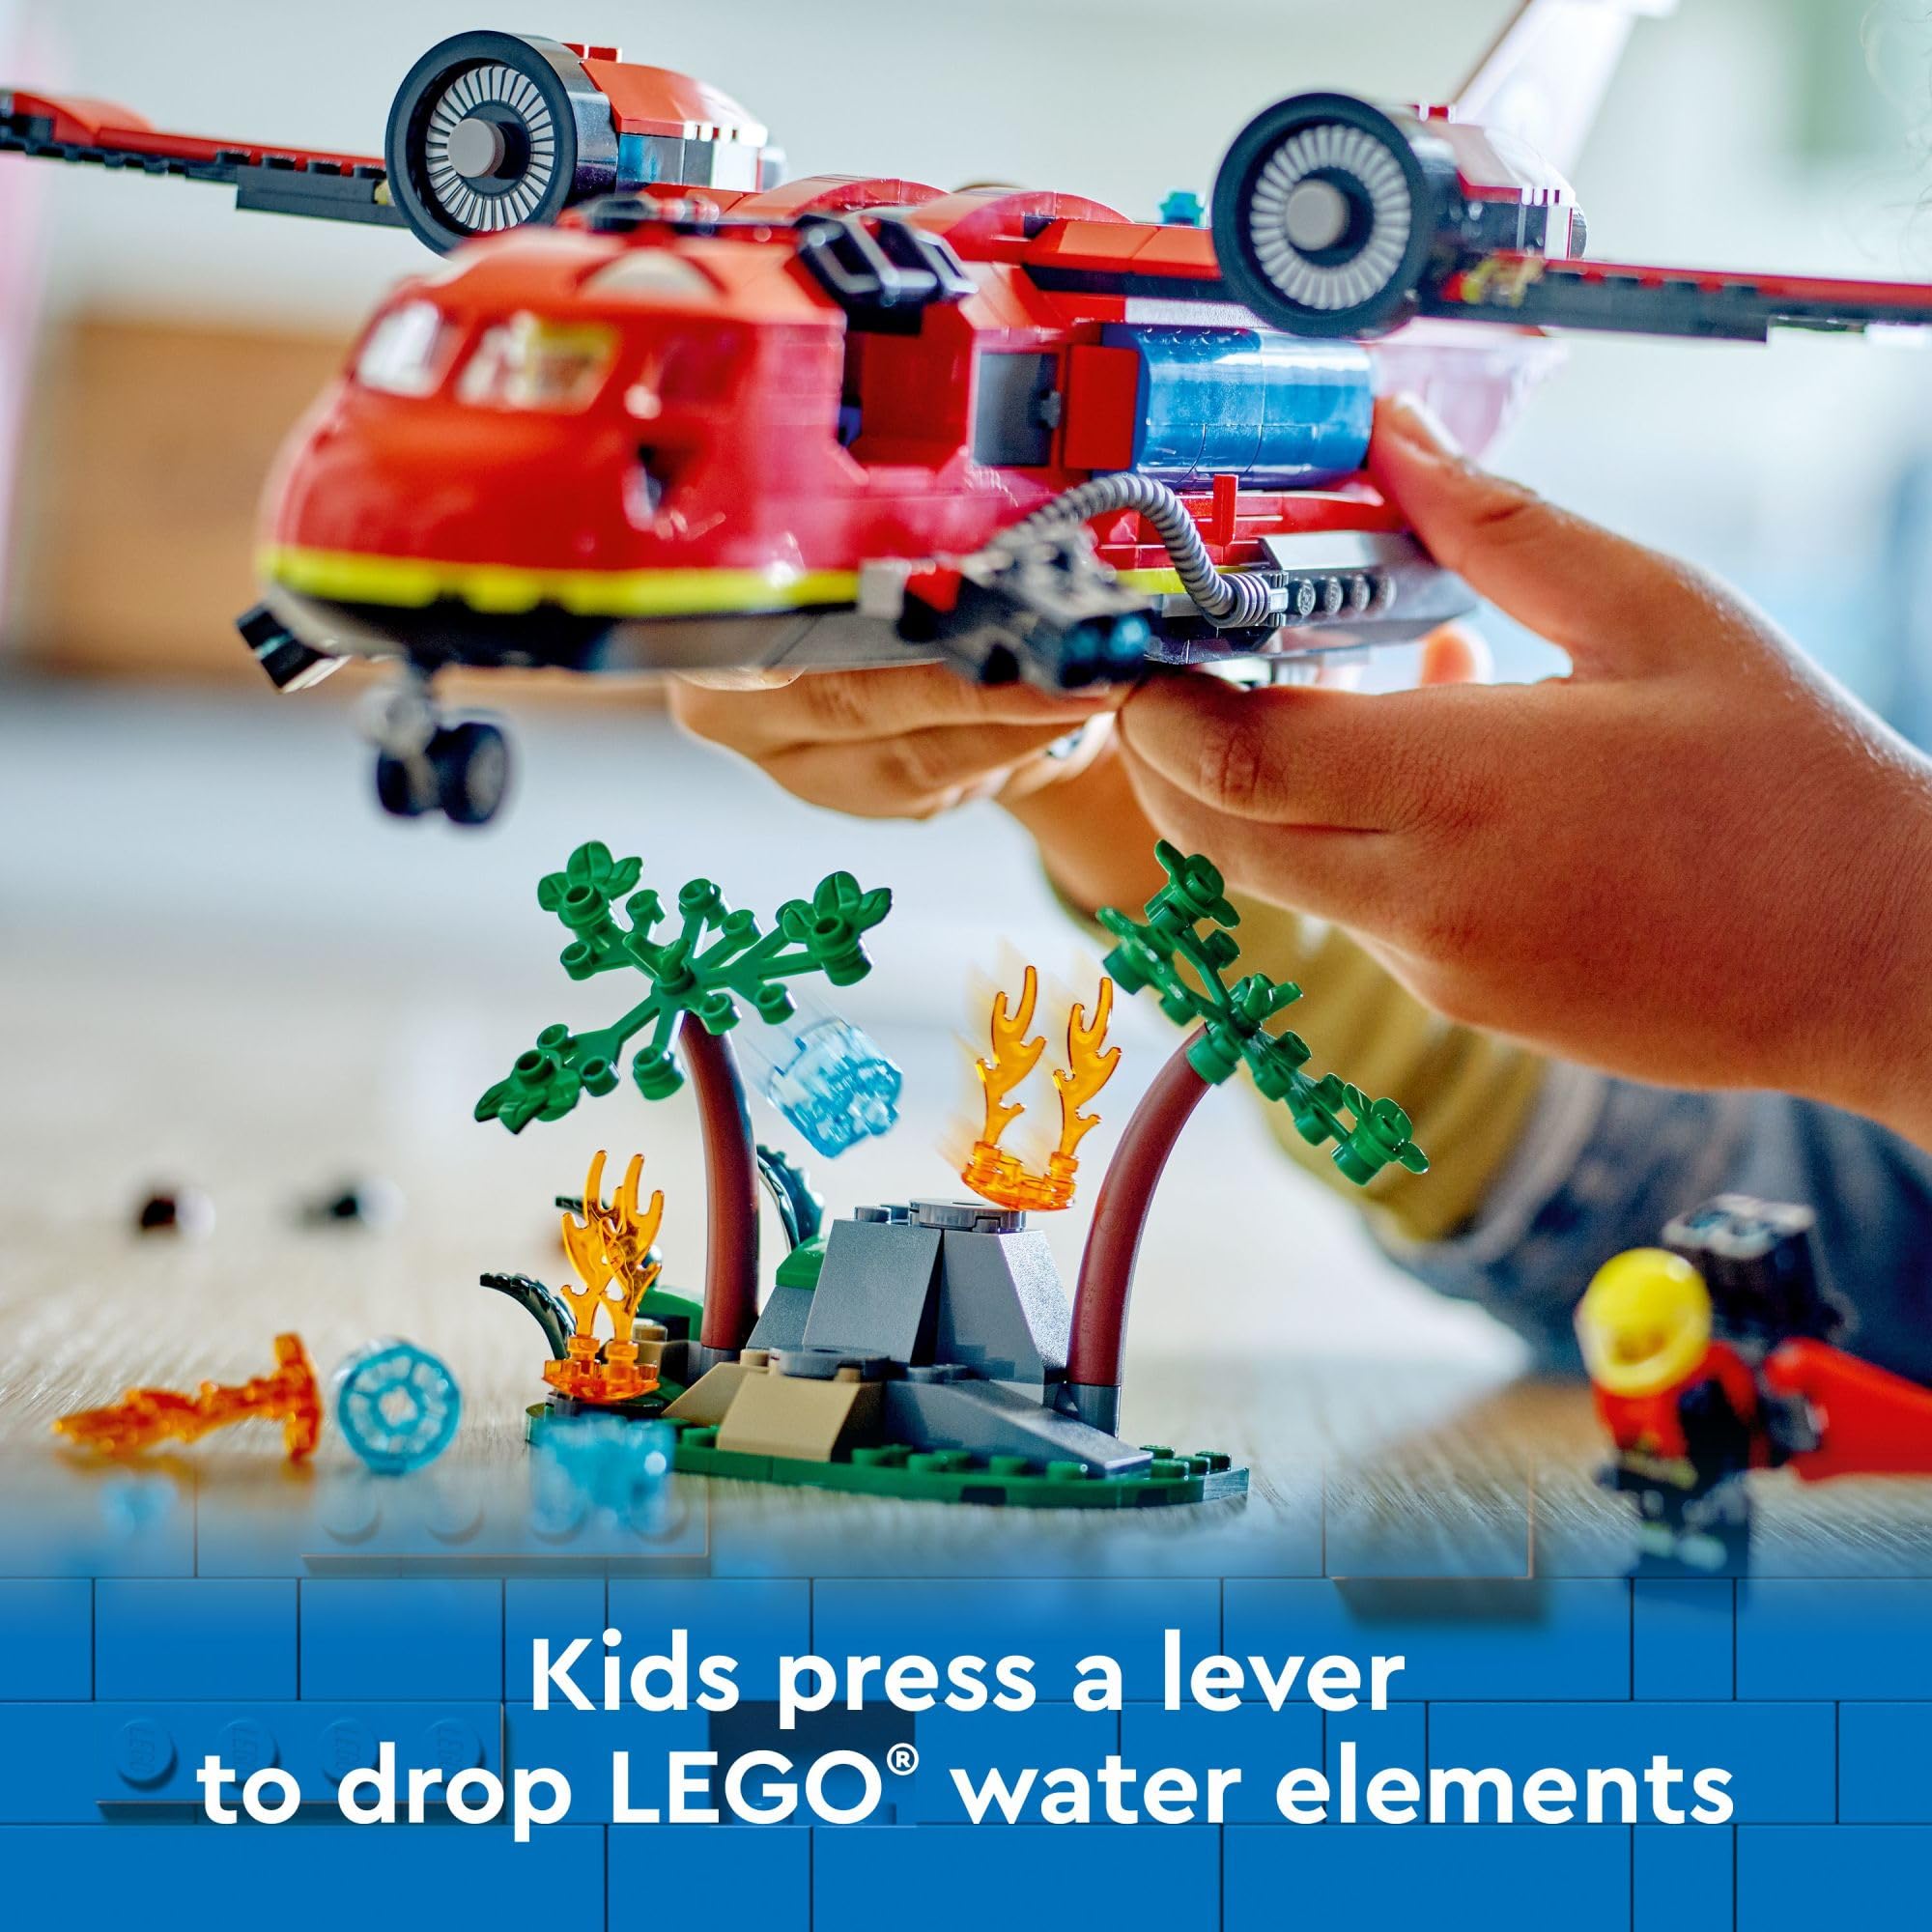 LEGO City Fire Rescue Plane Toy for Kids and Fans of Firefighter Toys, Fun Birthday Gift Idea for Boys and Girls Ages 6+ who Love Airplane Toys and Imaginative Play, Includes 3 Minifigures, 60413